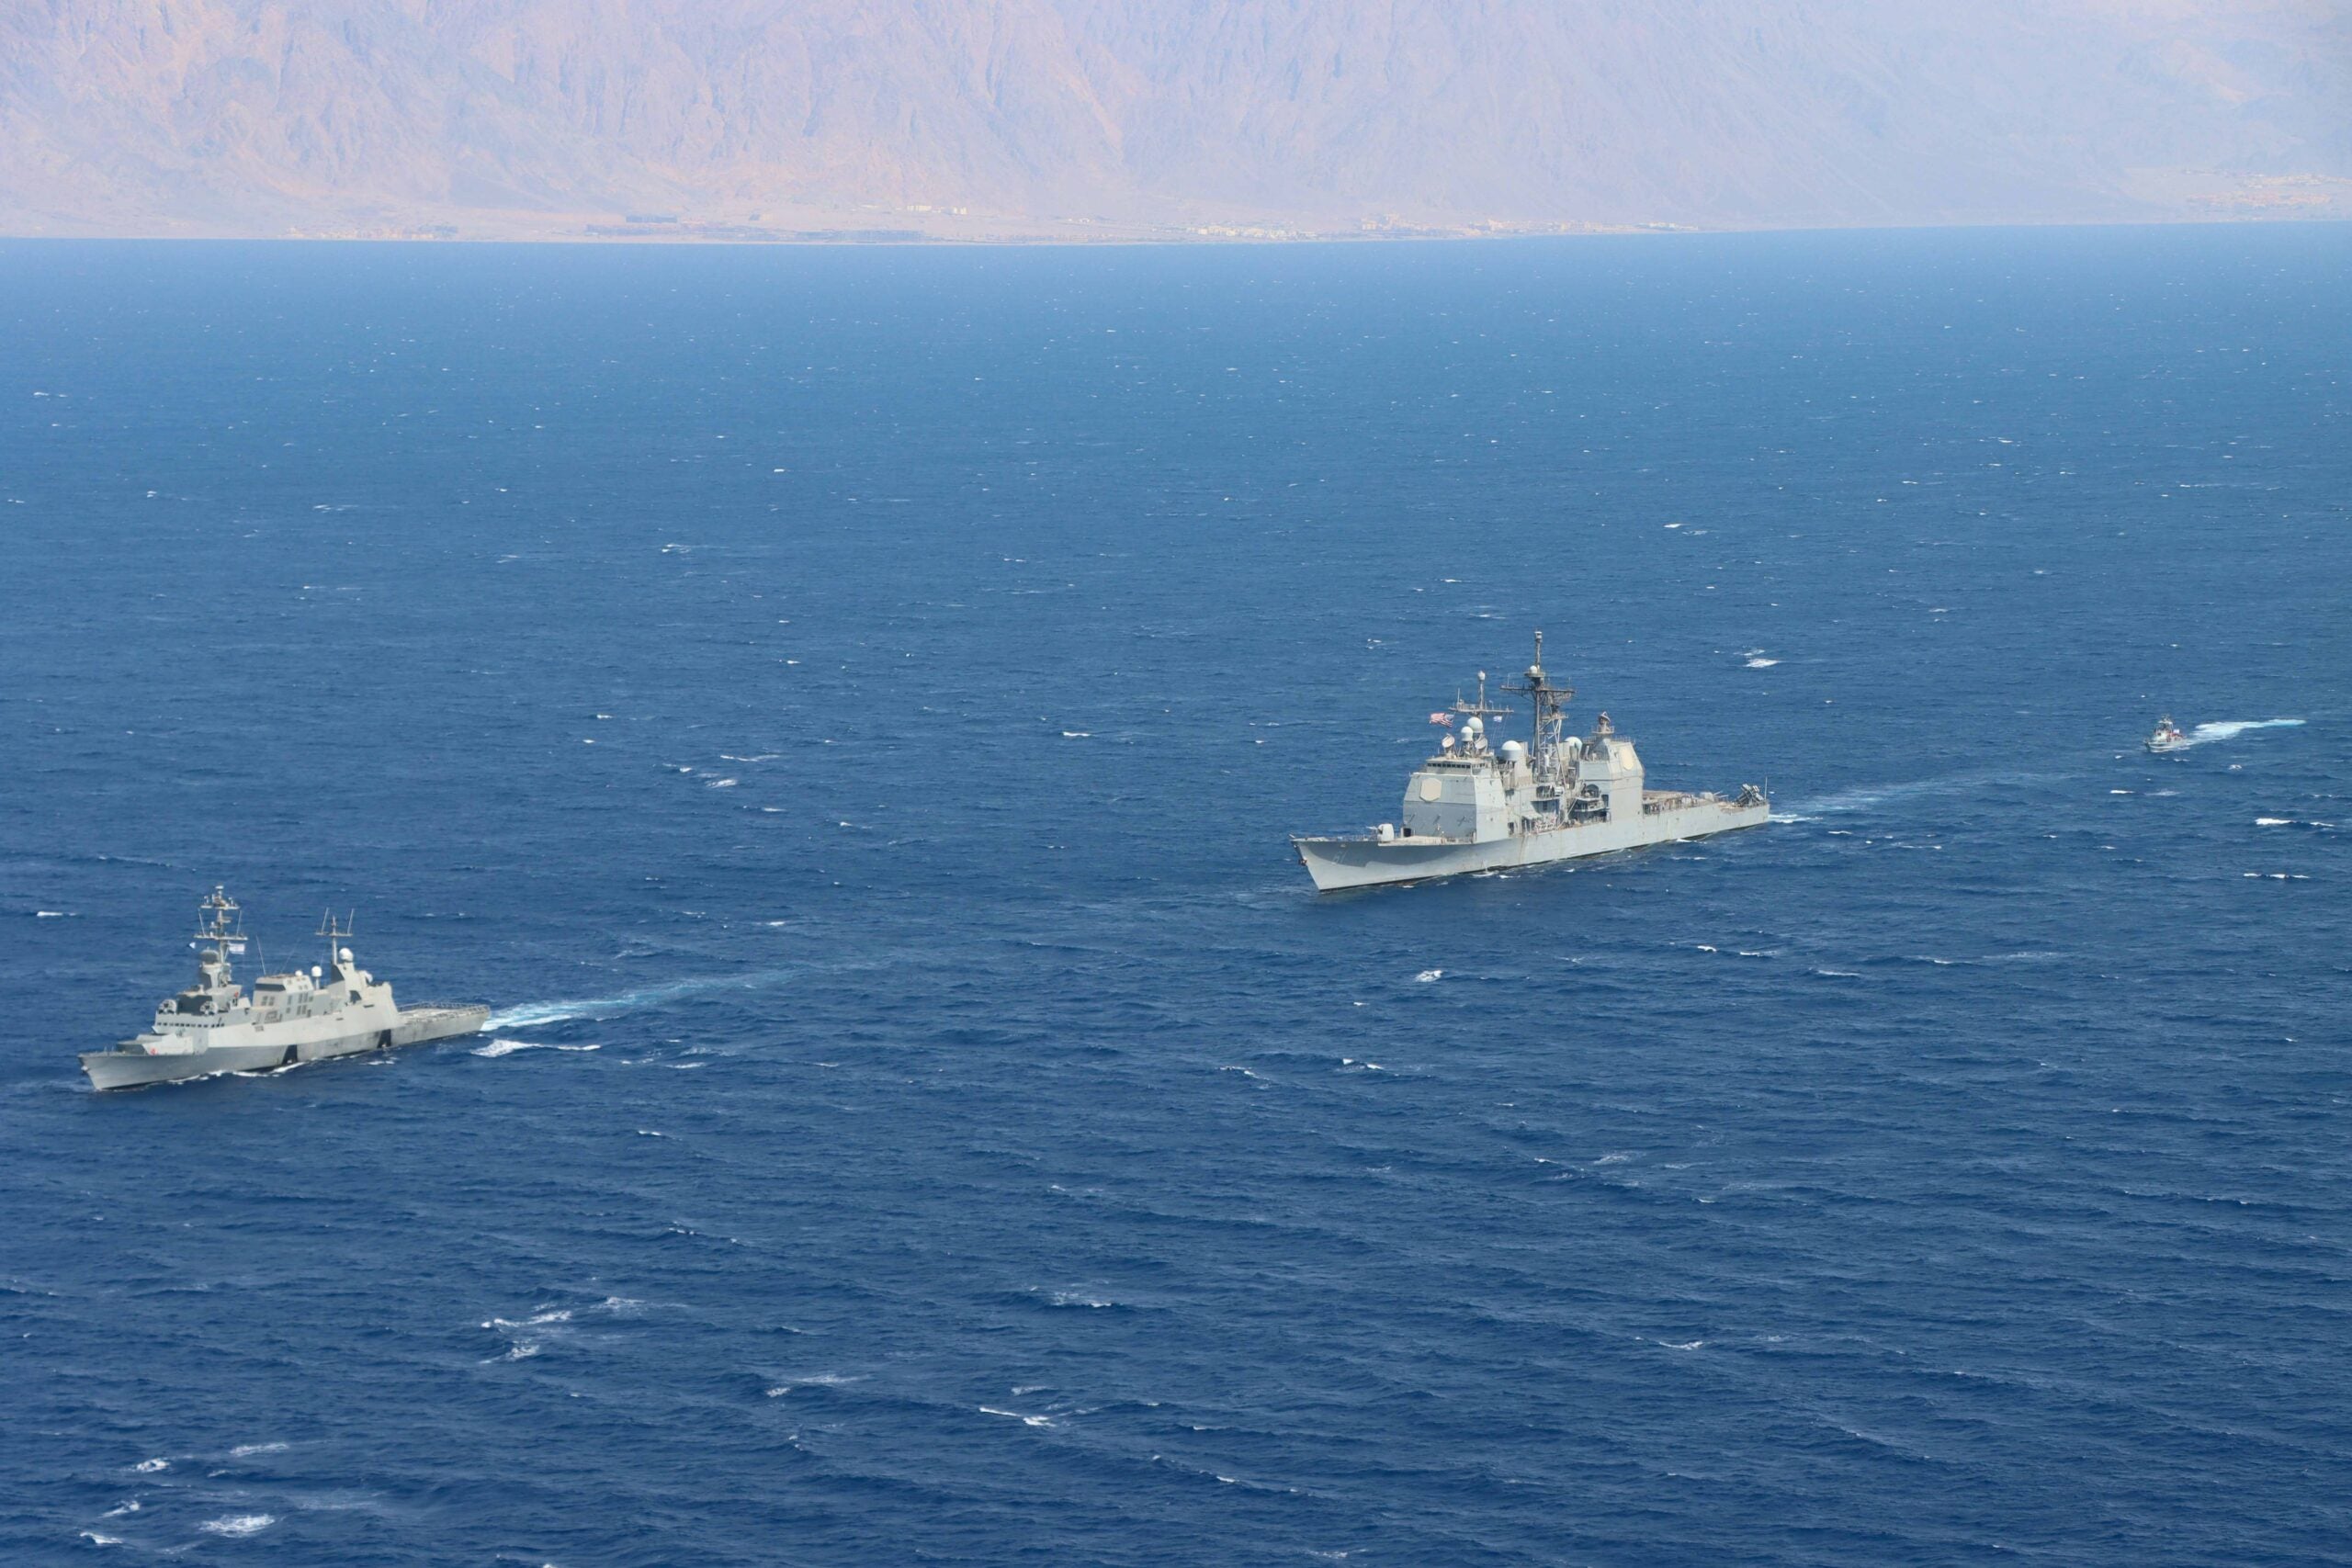 US and Israeli naval vessels sail together in Gulf of Aqaba